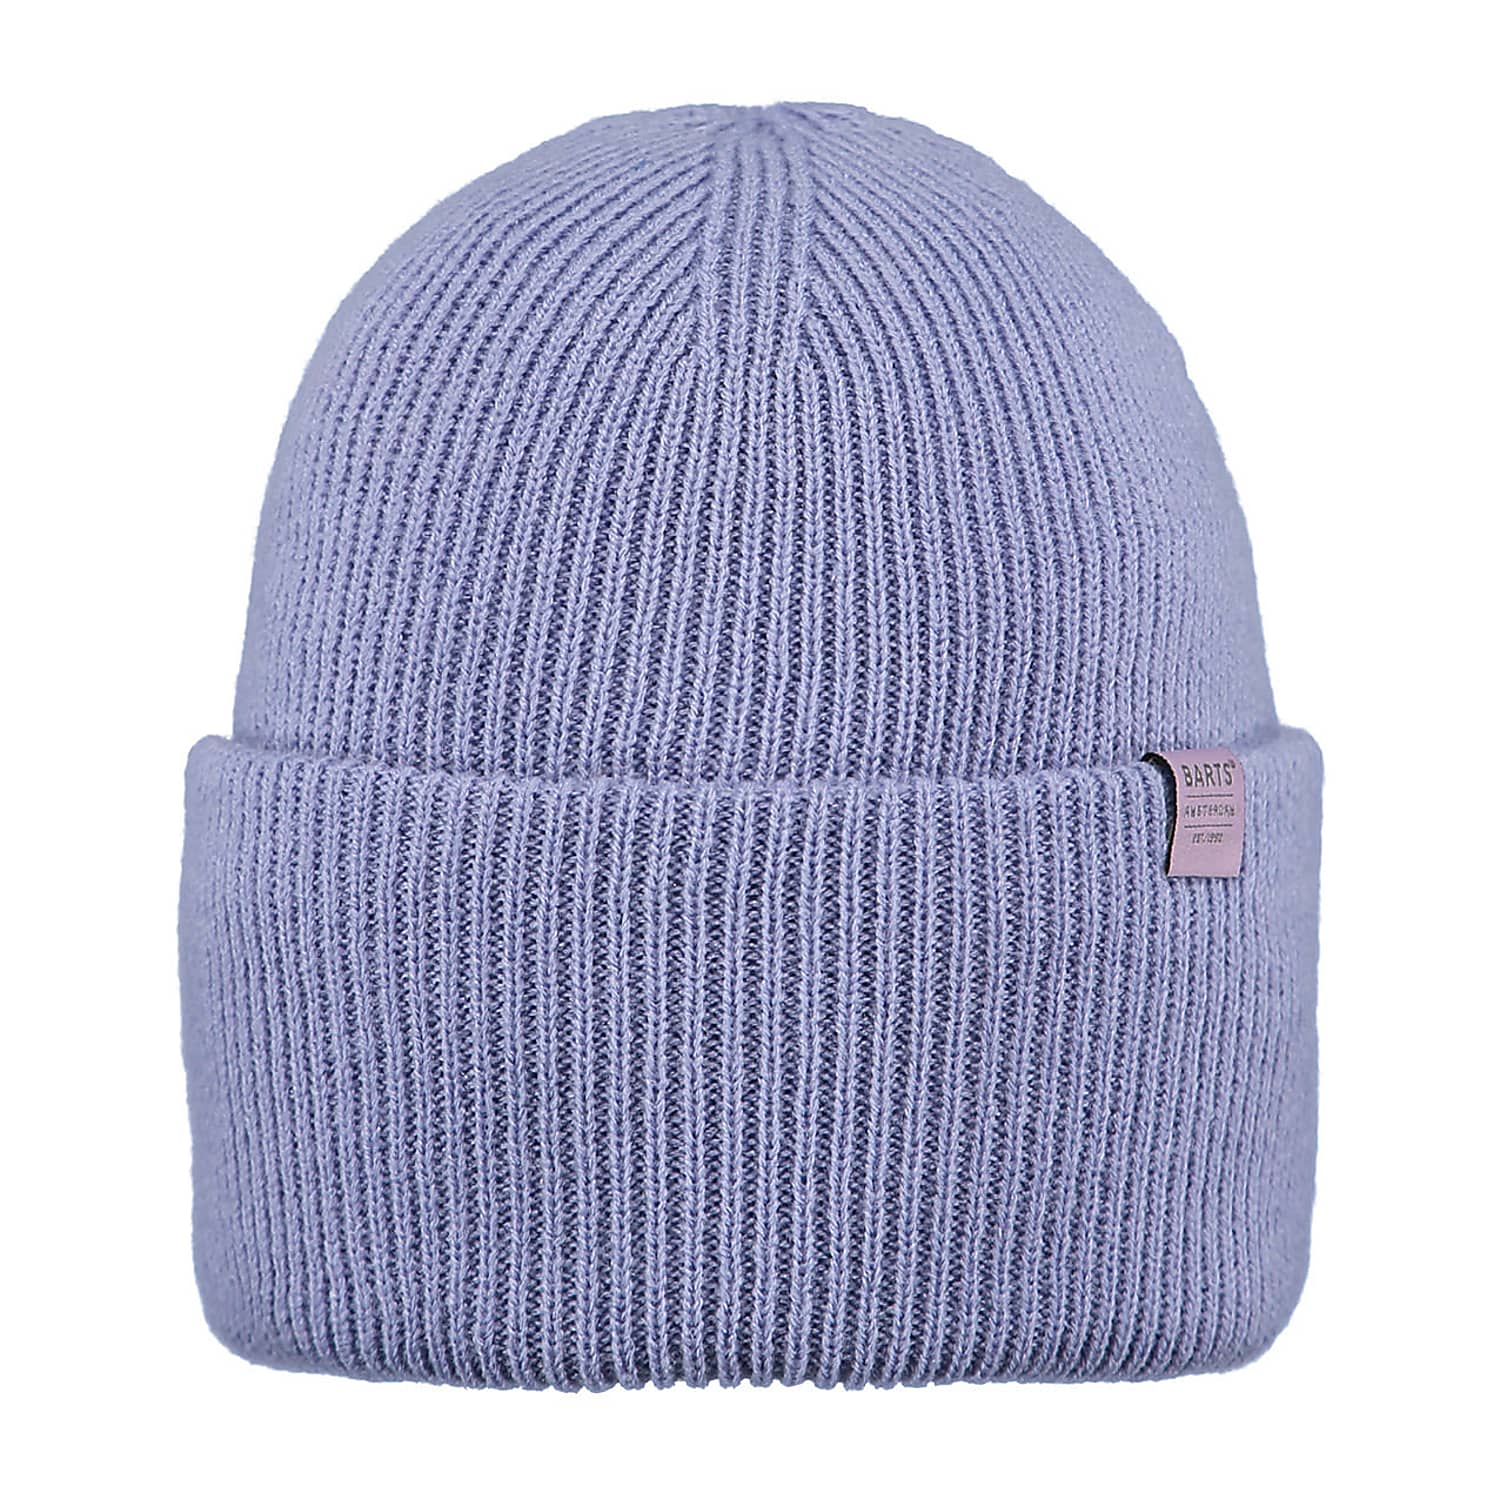 Barts HAVENO cheap Berry BEANIE, II - Fast shipping and